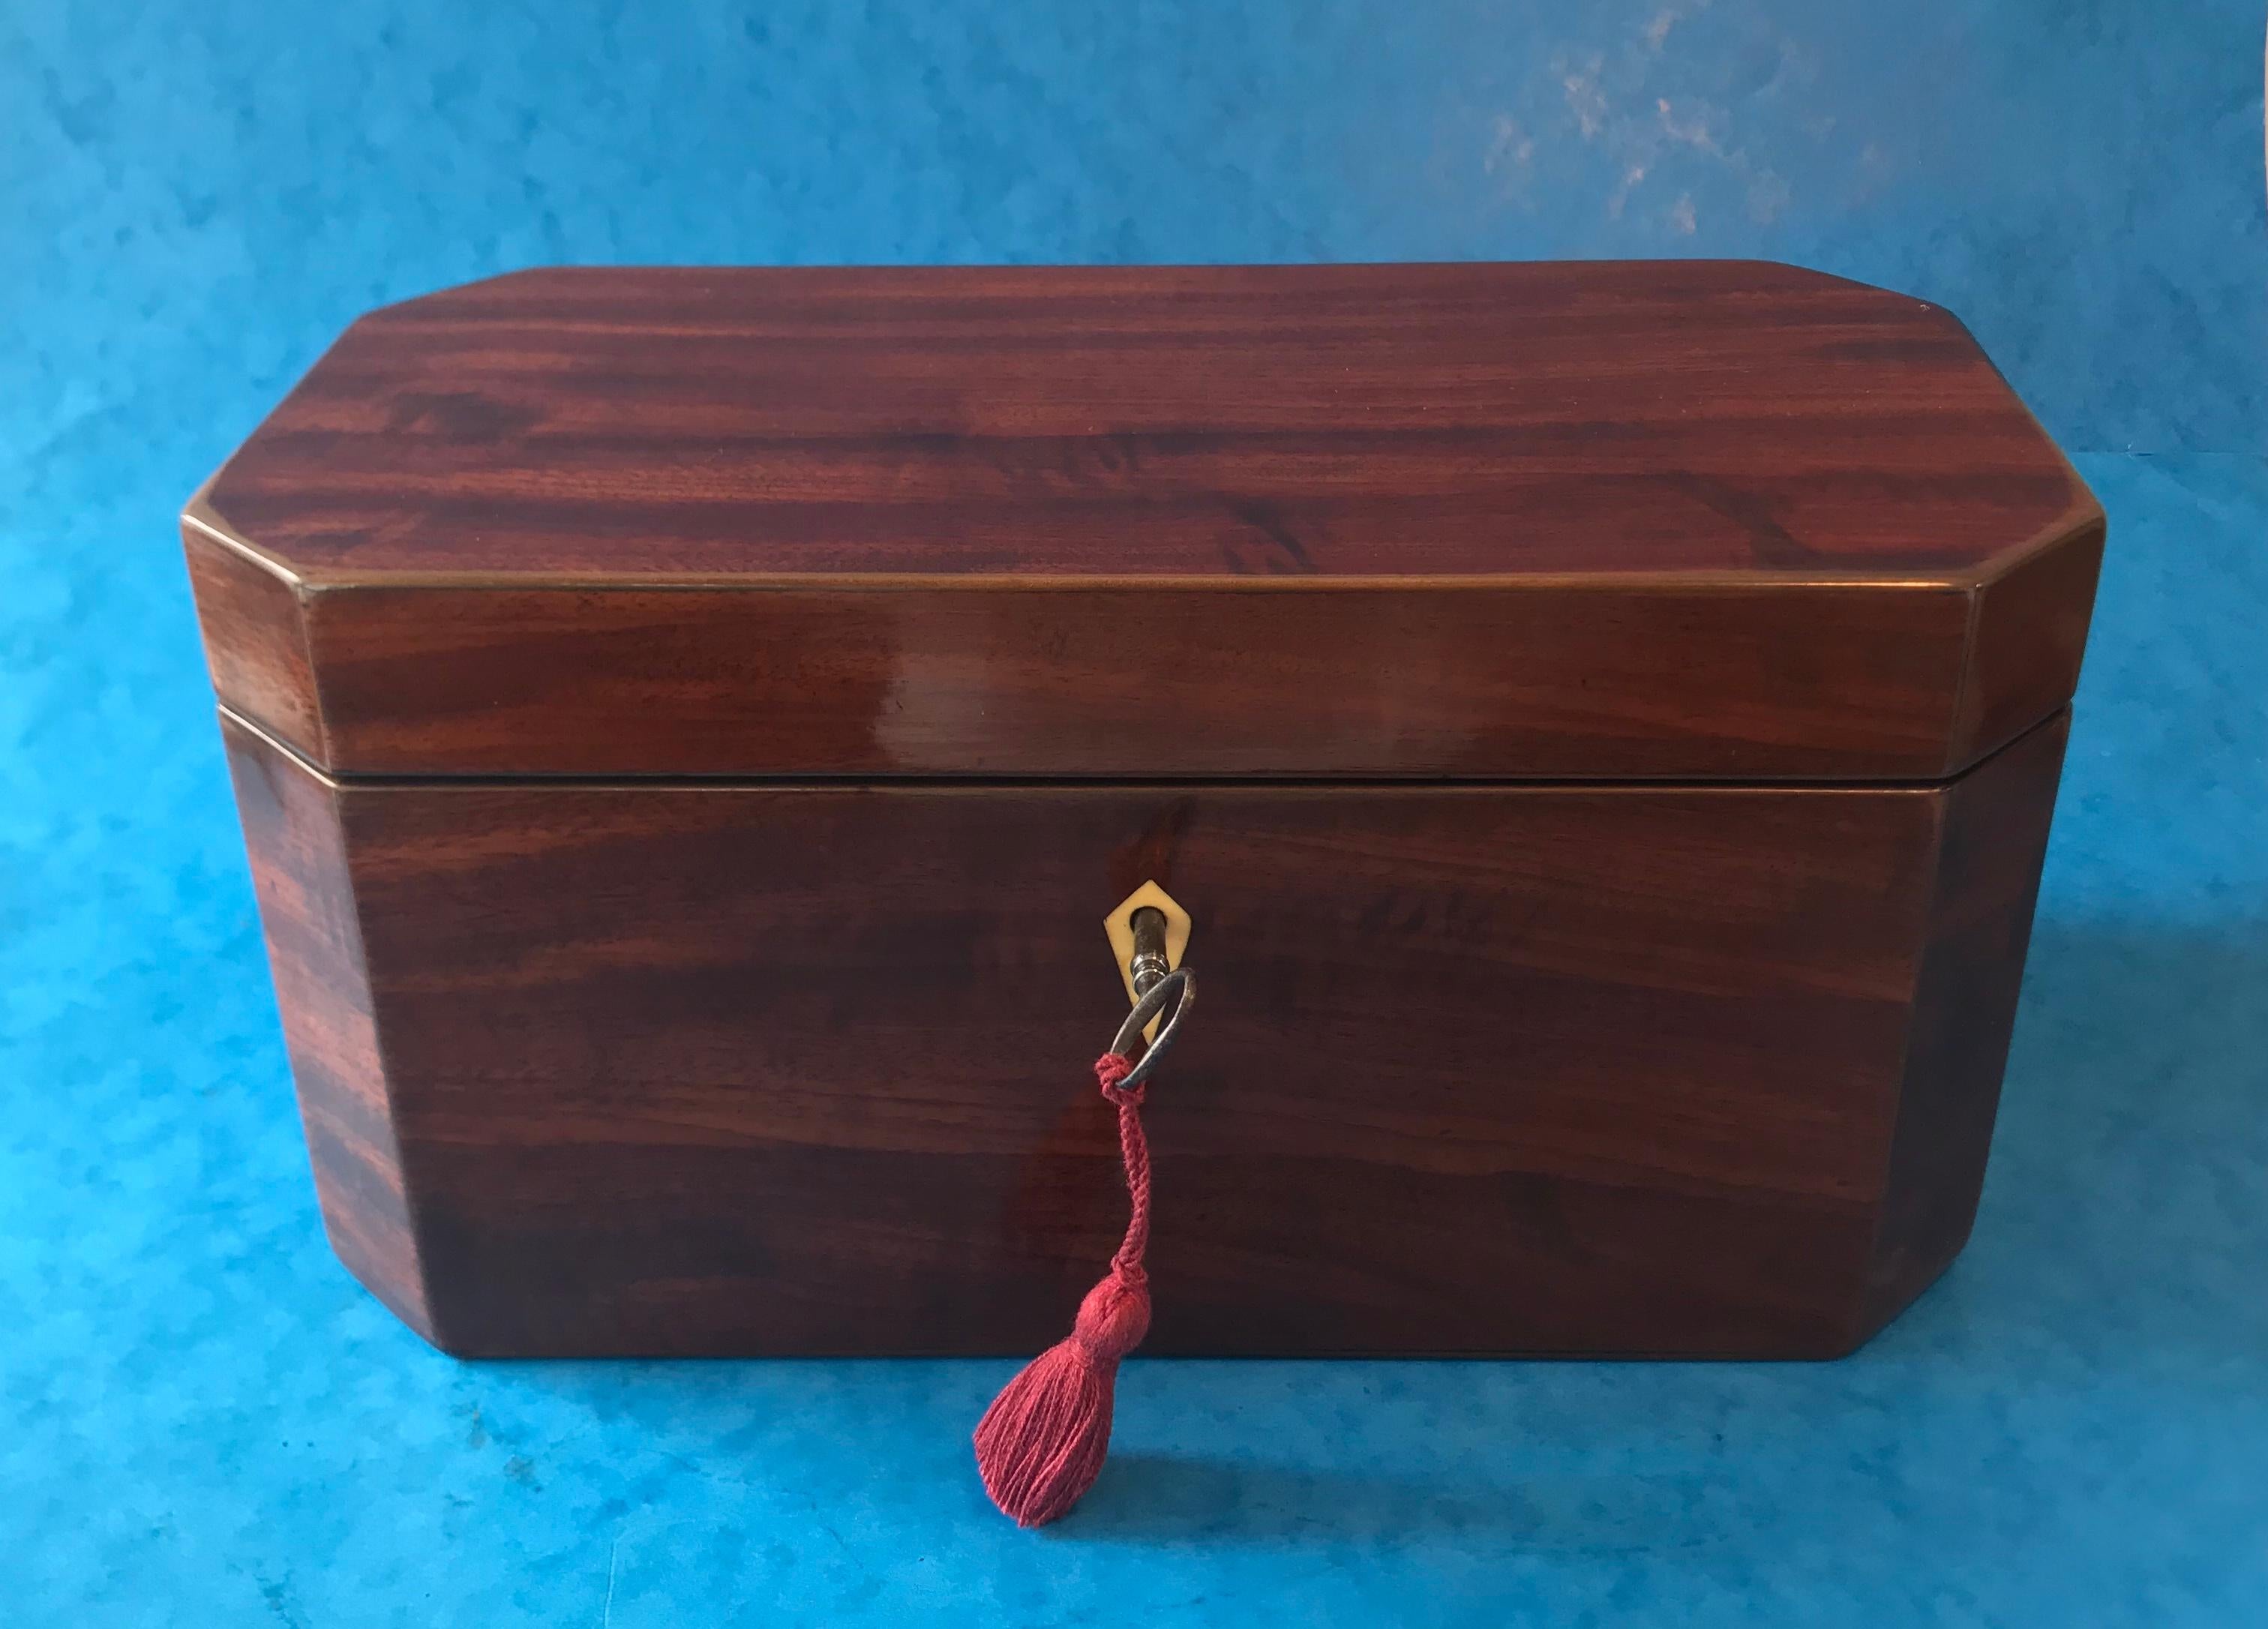 George III hexagonal mahogany tea caddy. Lovely box with cut corner with superb mahogany. The Caddy is in excellent condition with a working original key and lock (GR patent lock). Original interior with super cut crystal bowl, original Moroccan